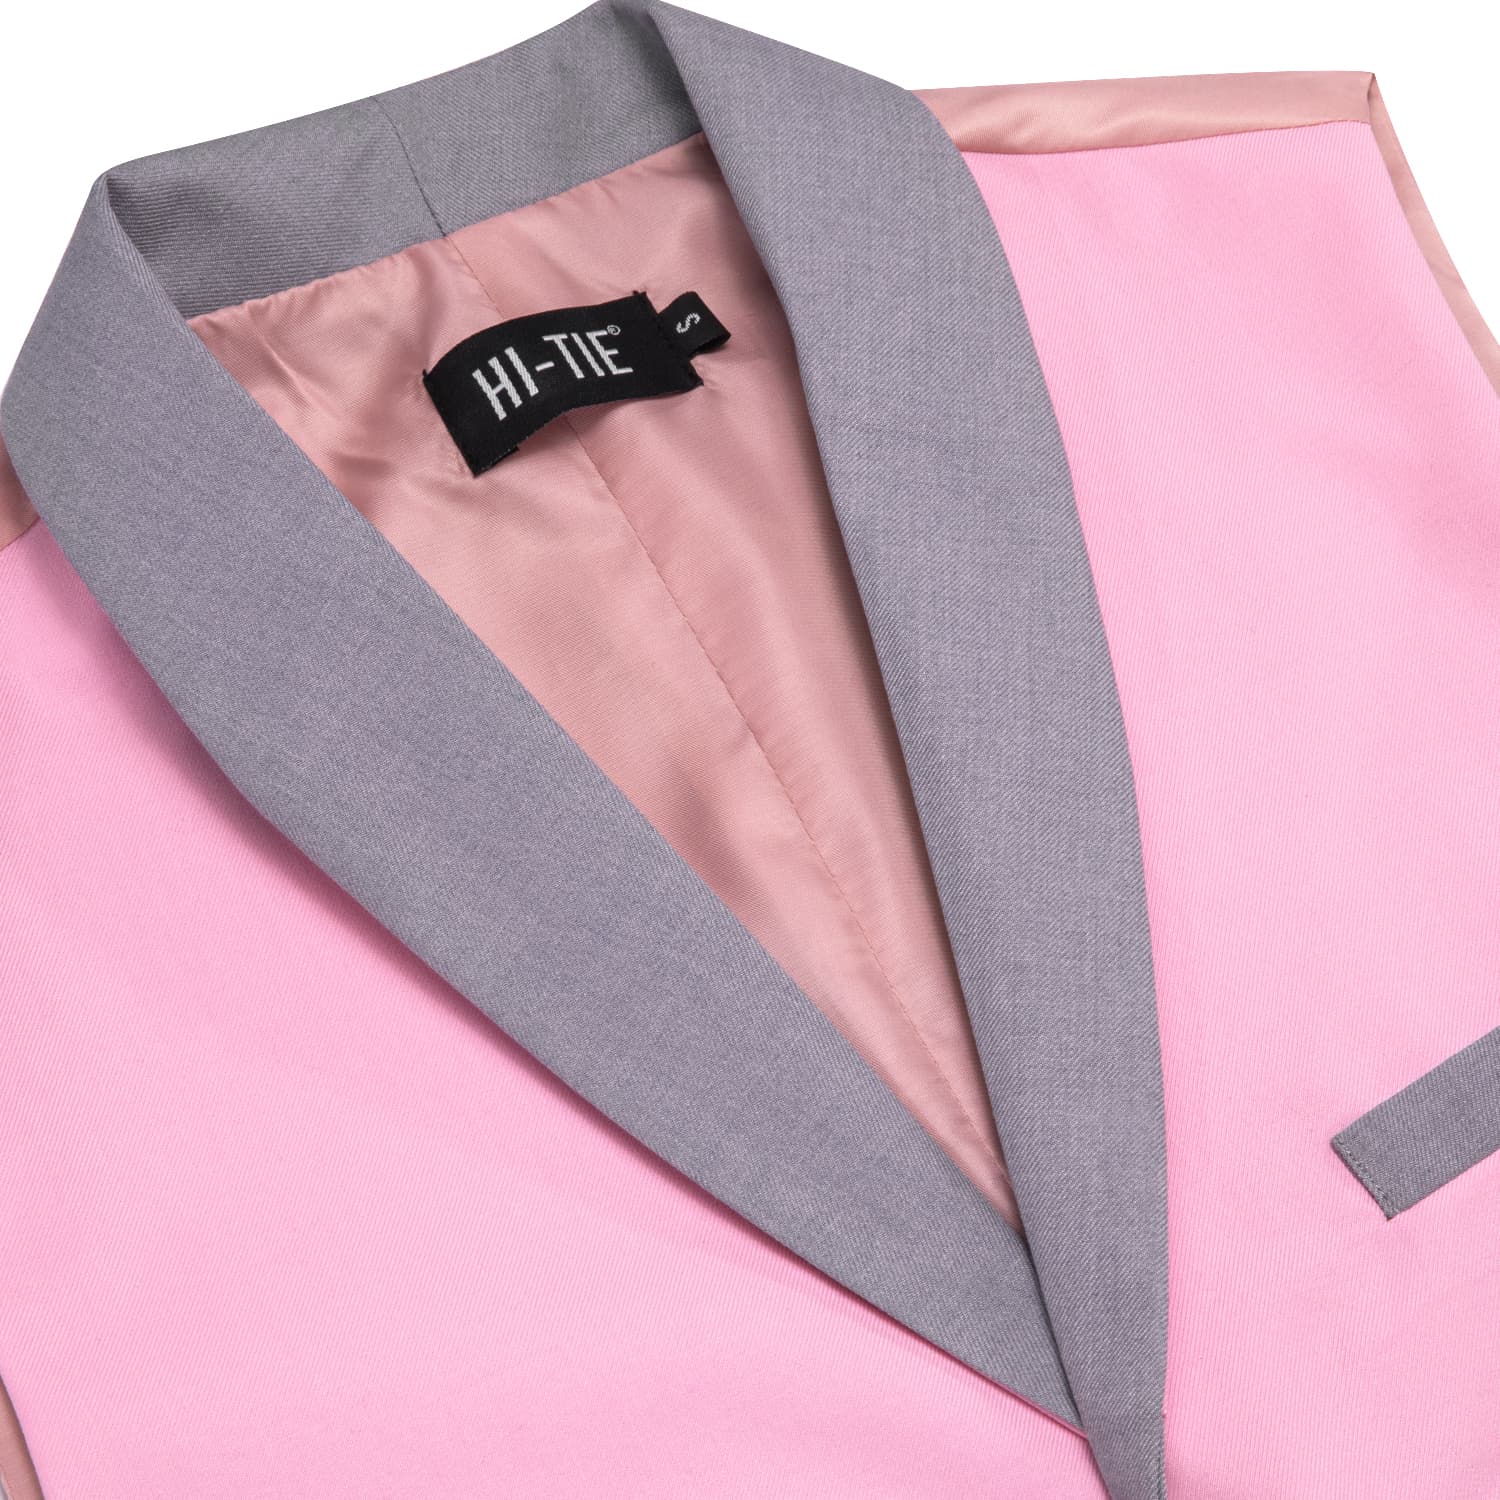 Grey Shawl Collar Pink Solid Waistcoat Formal Vests for Business